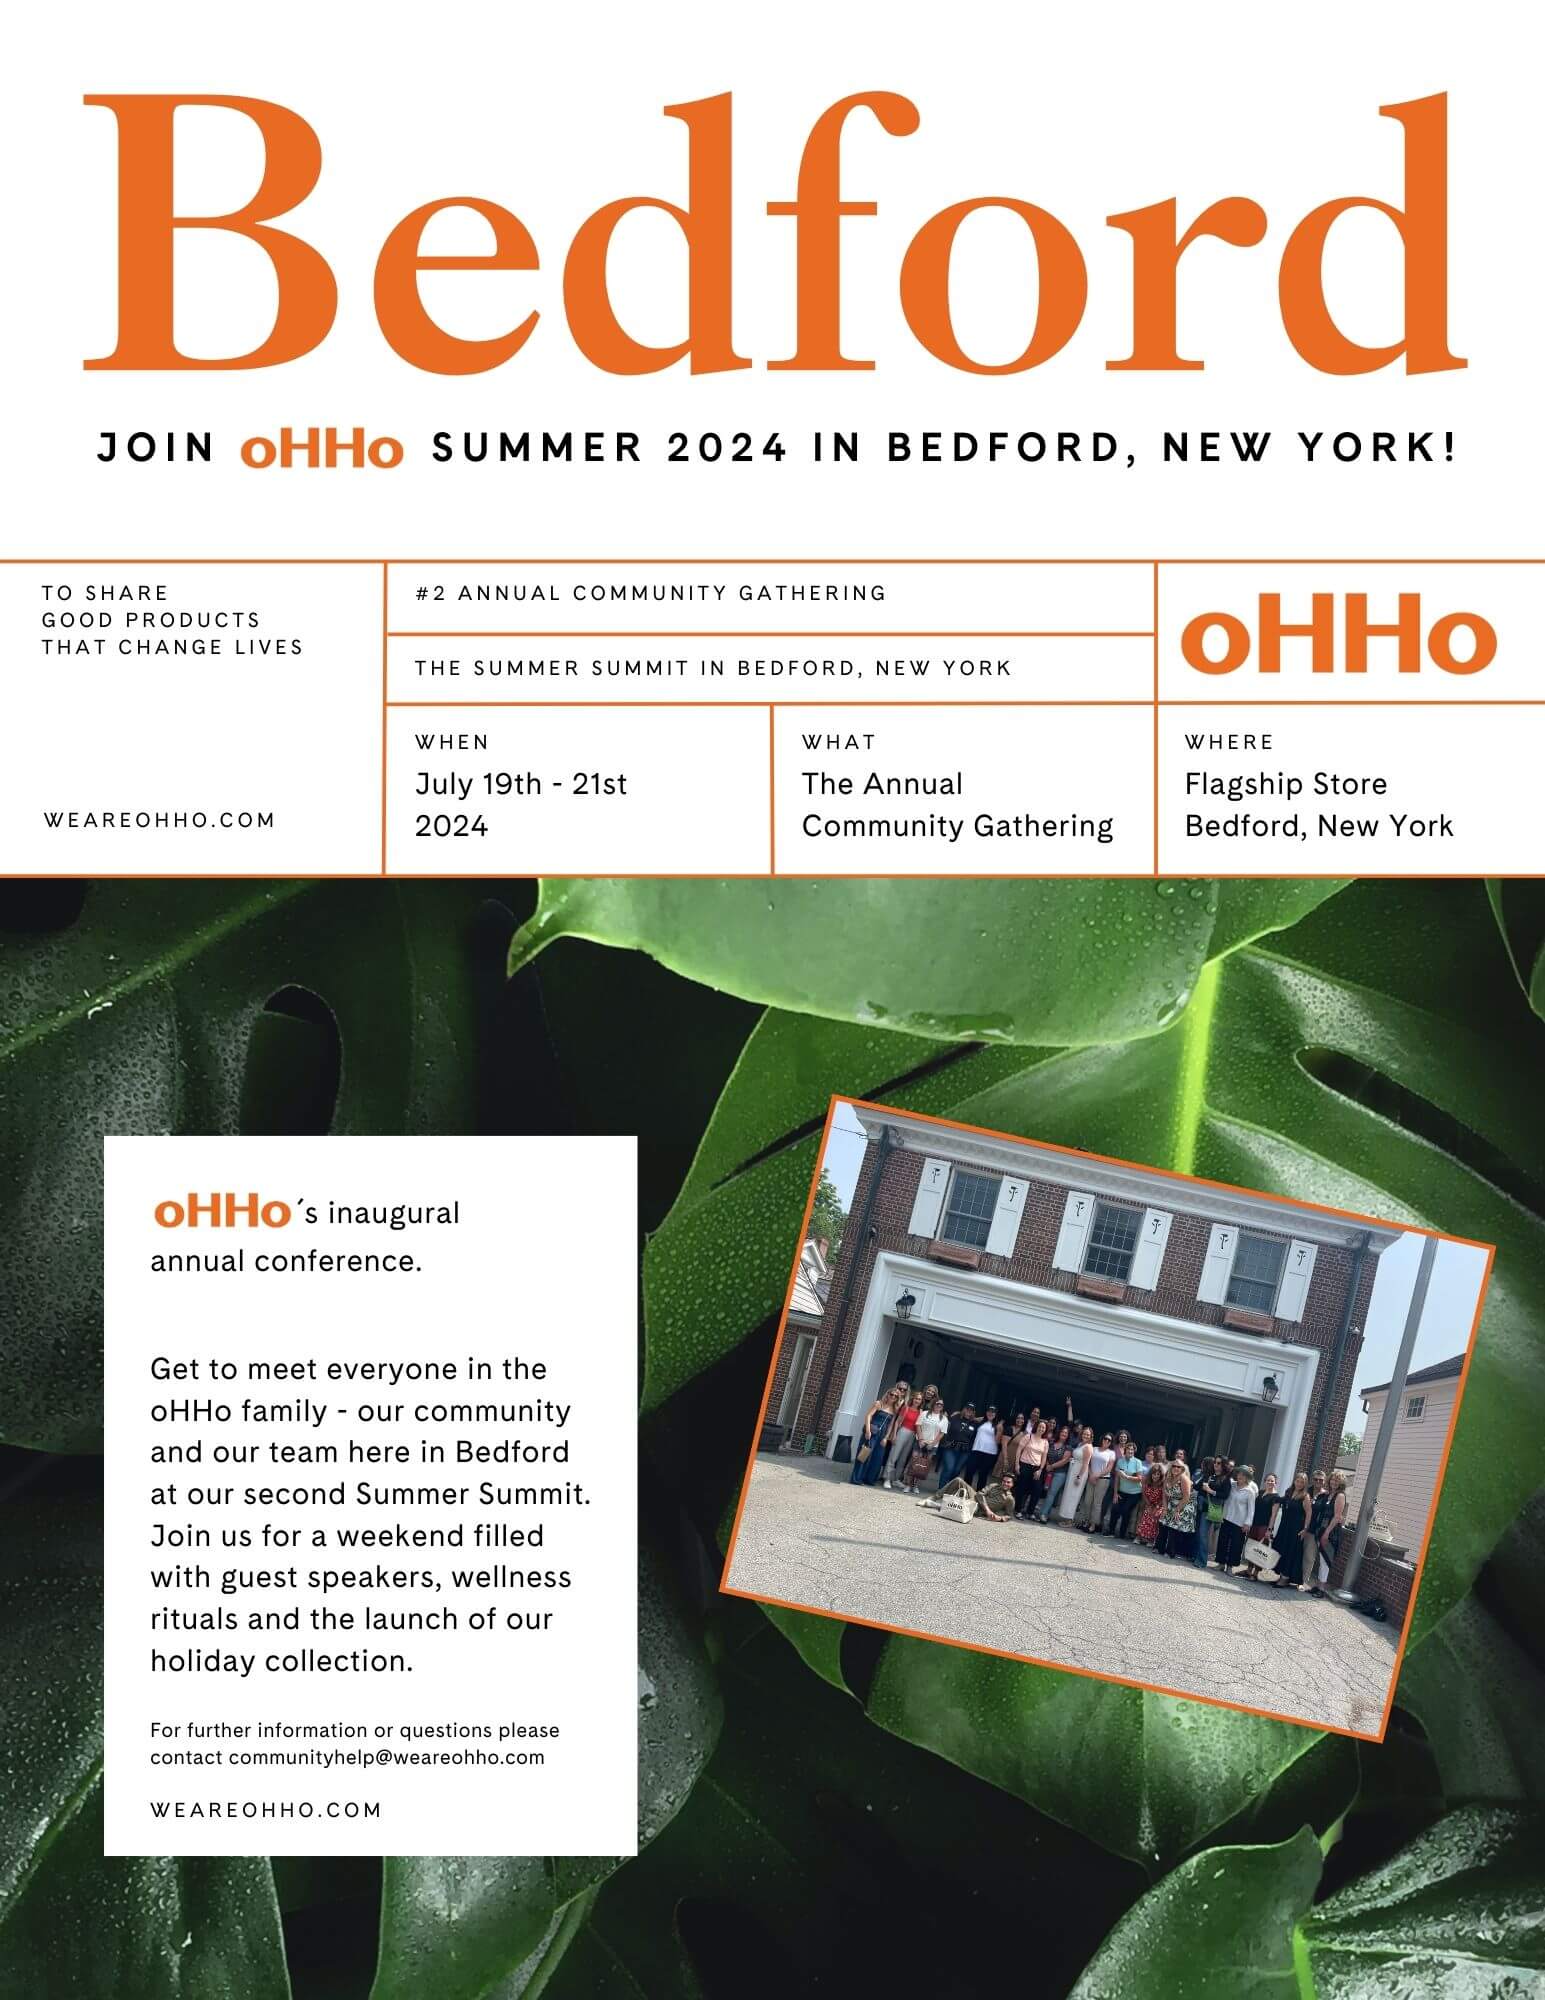 Bedford summer summit image for 2024